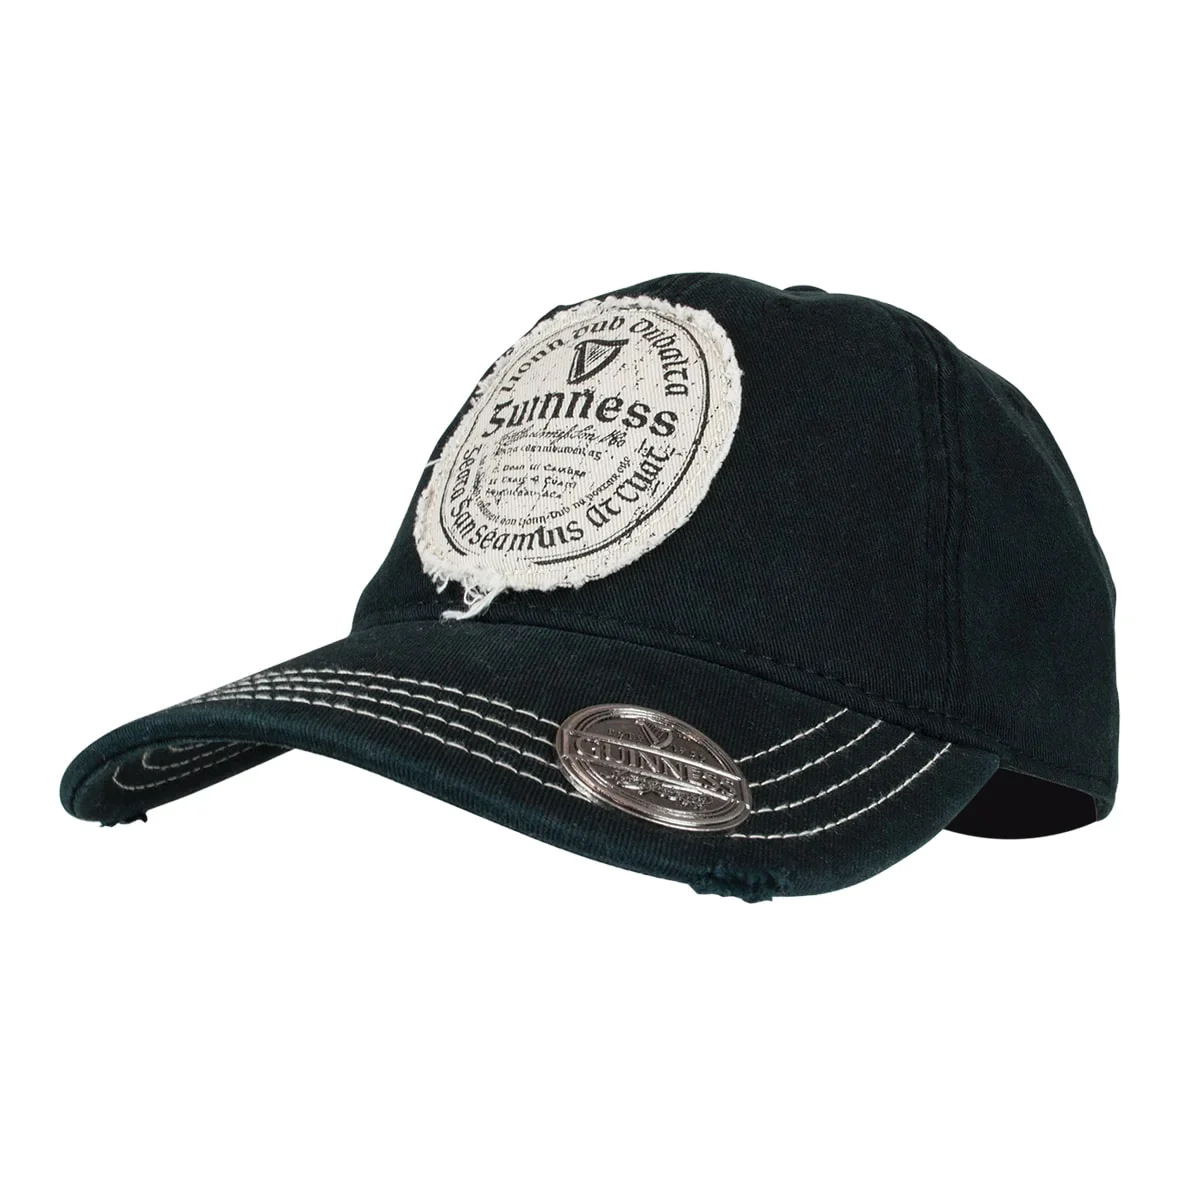 A black hat with a patch on it